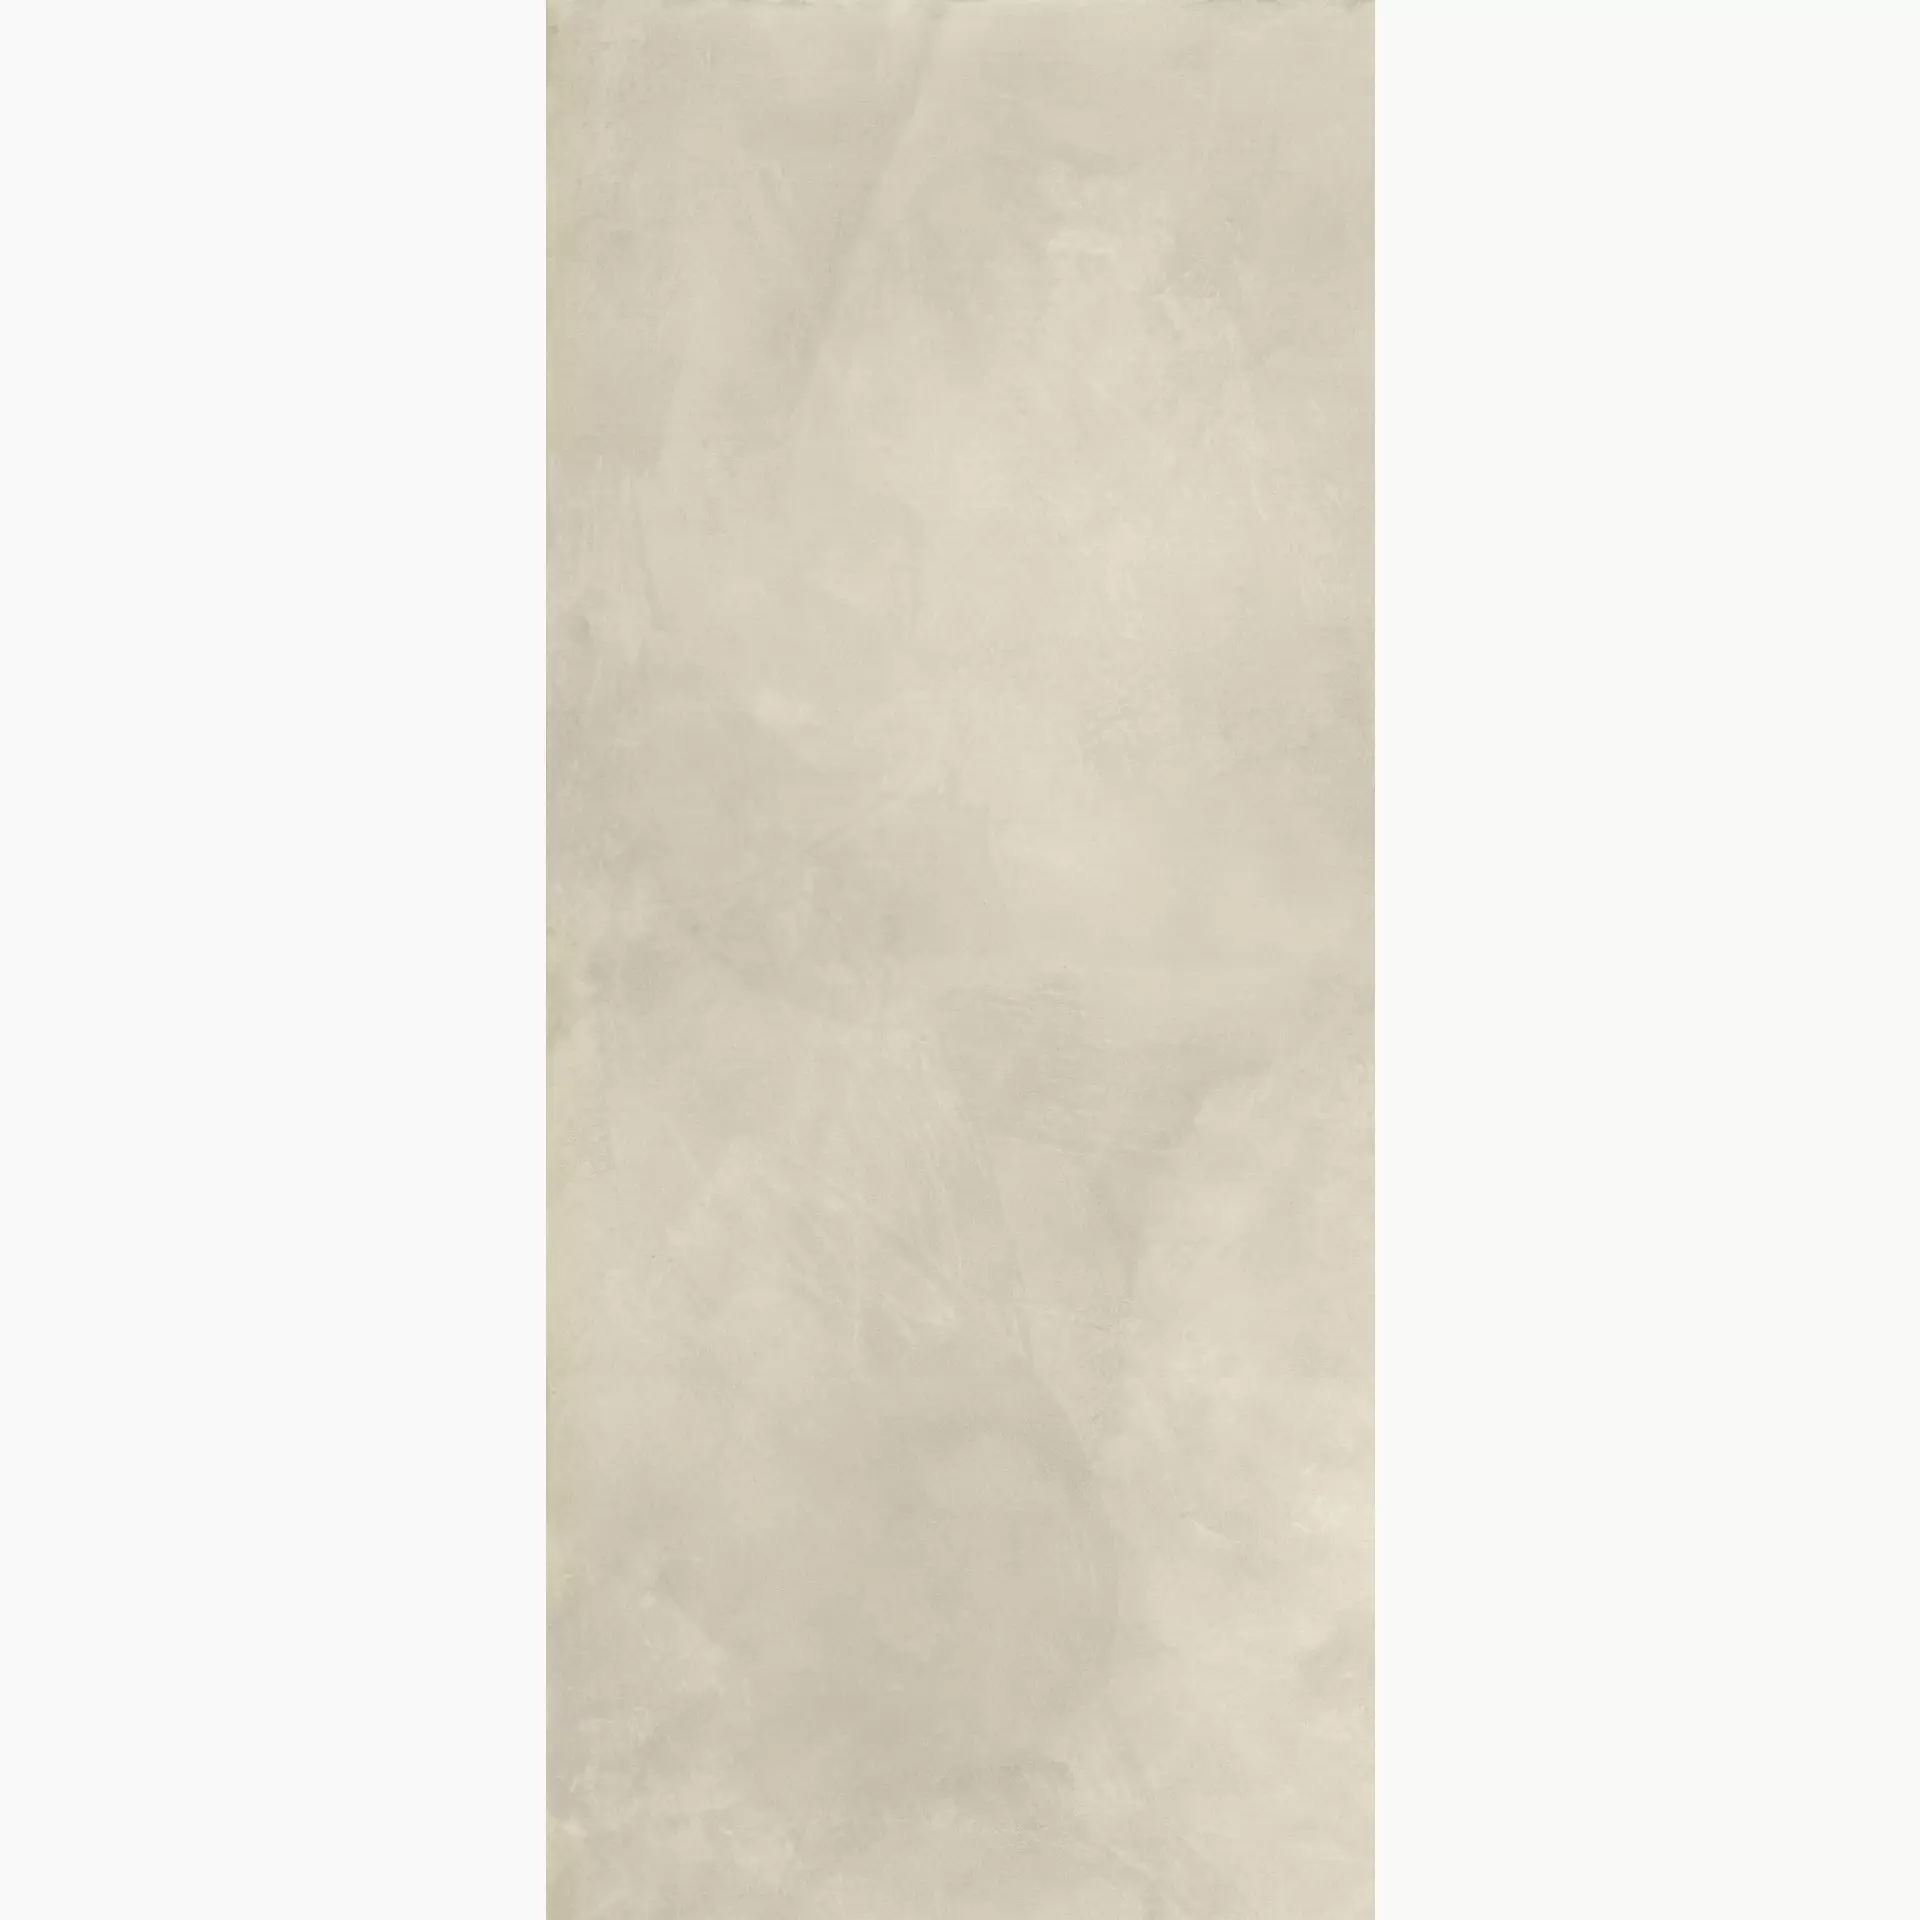 Mirage Clay Cl 01 Calm Spazzolato APA5 120x278cm rectified 6mm